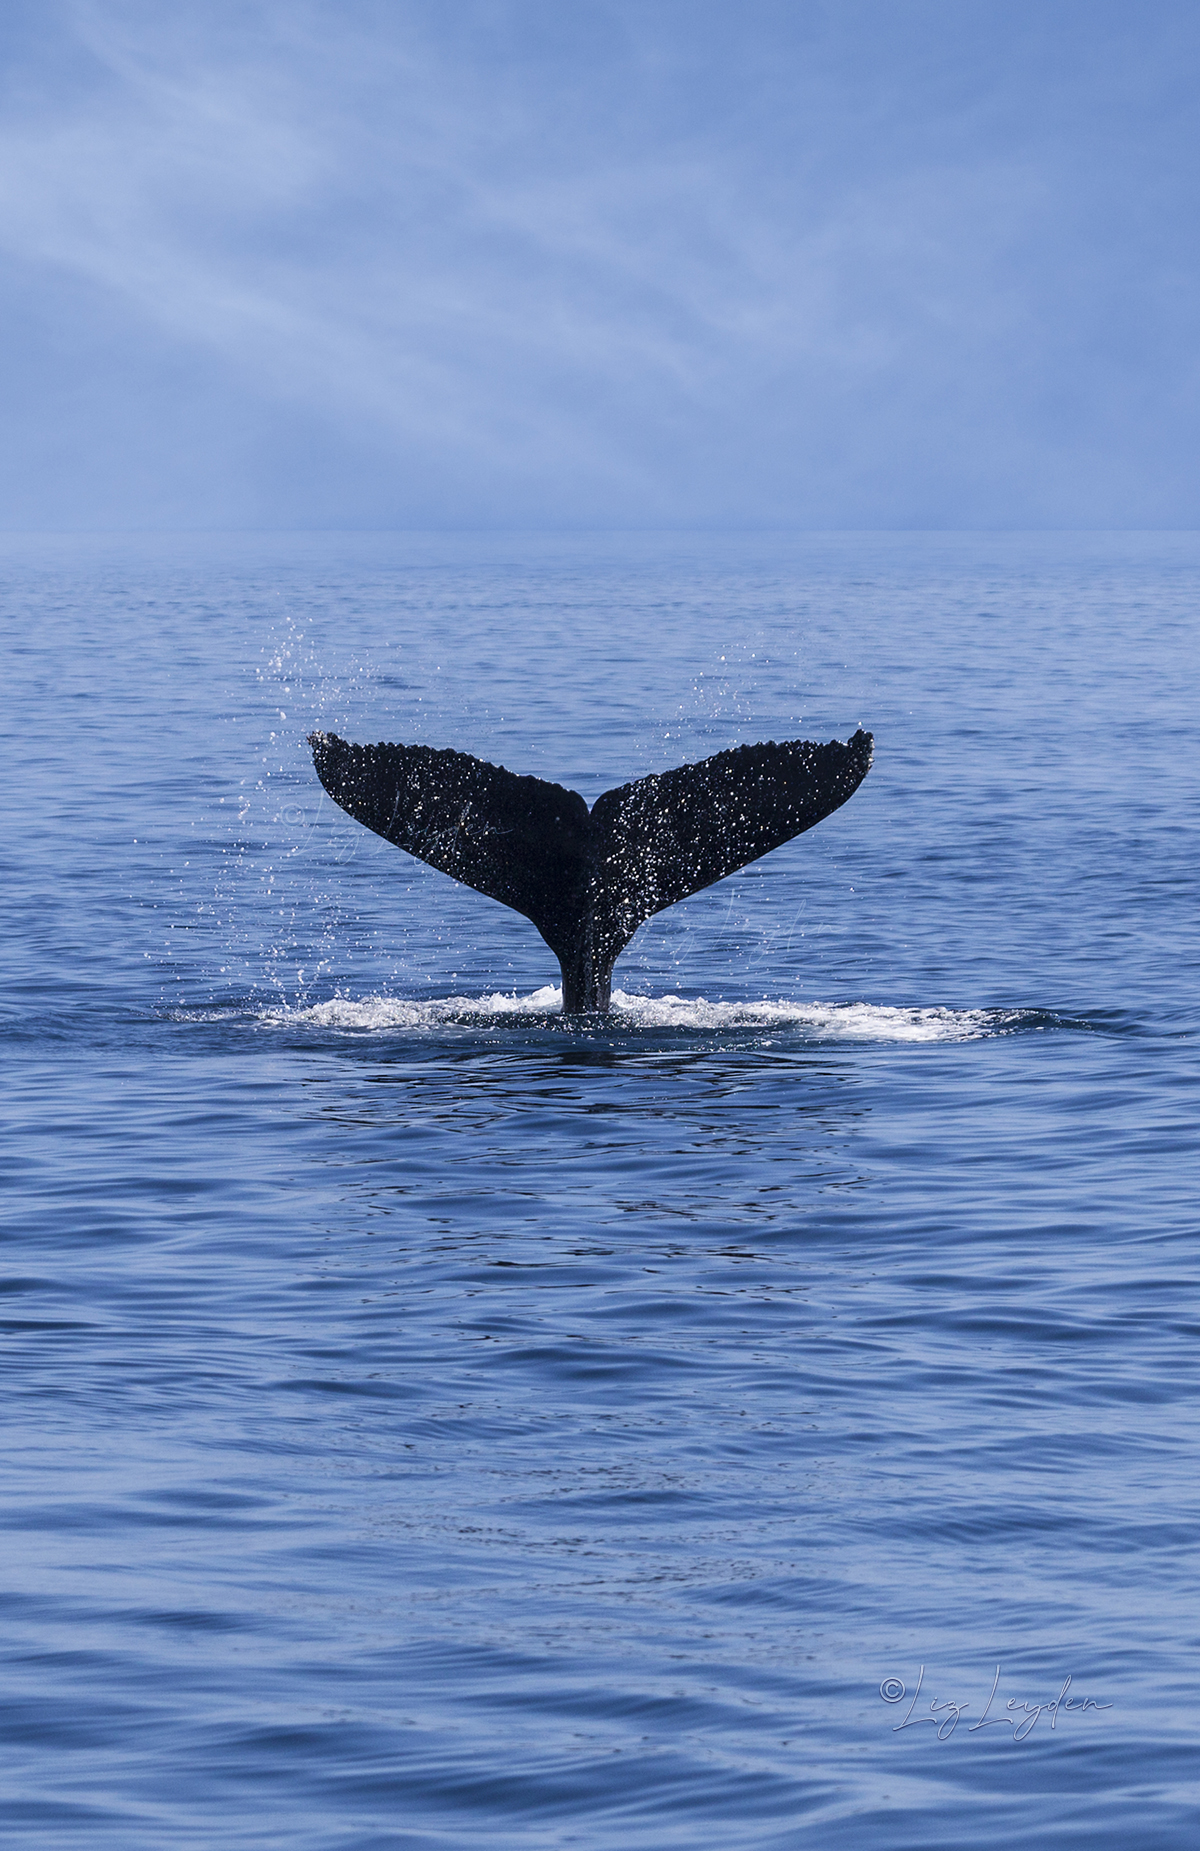 Tail fluke of a diving Humpback Whale